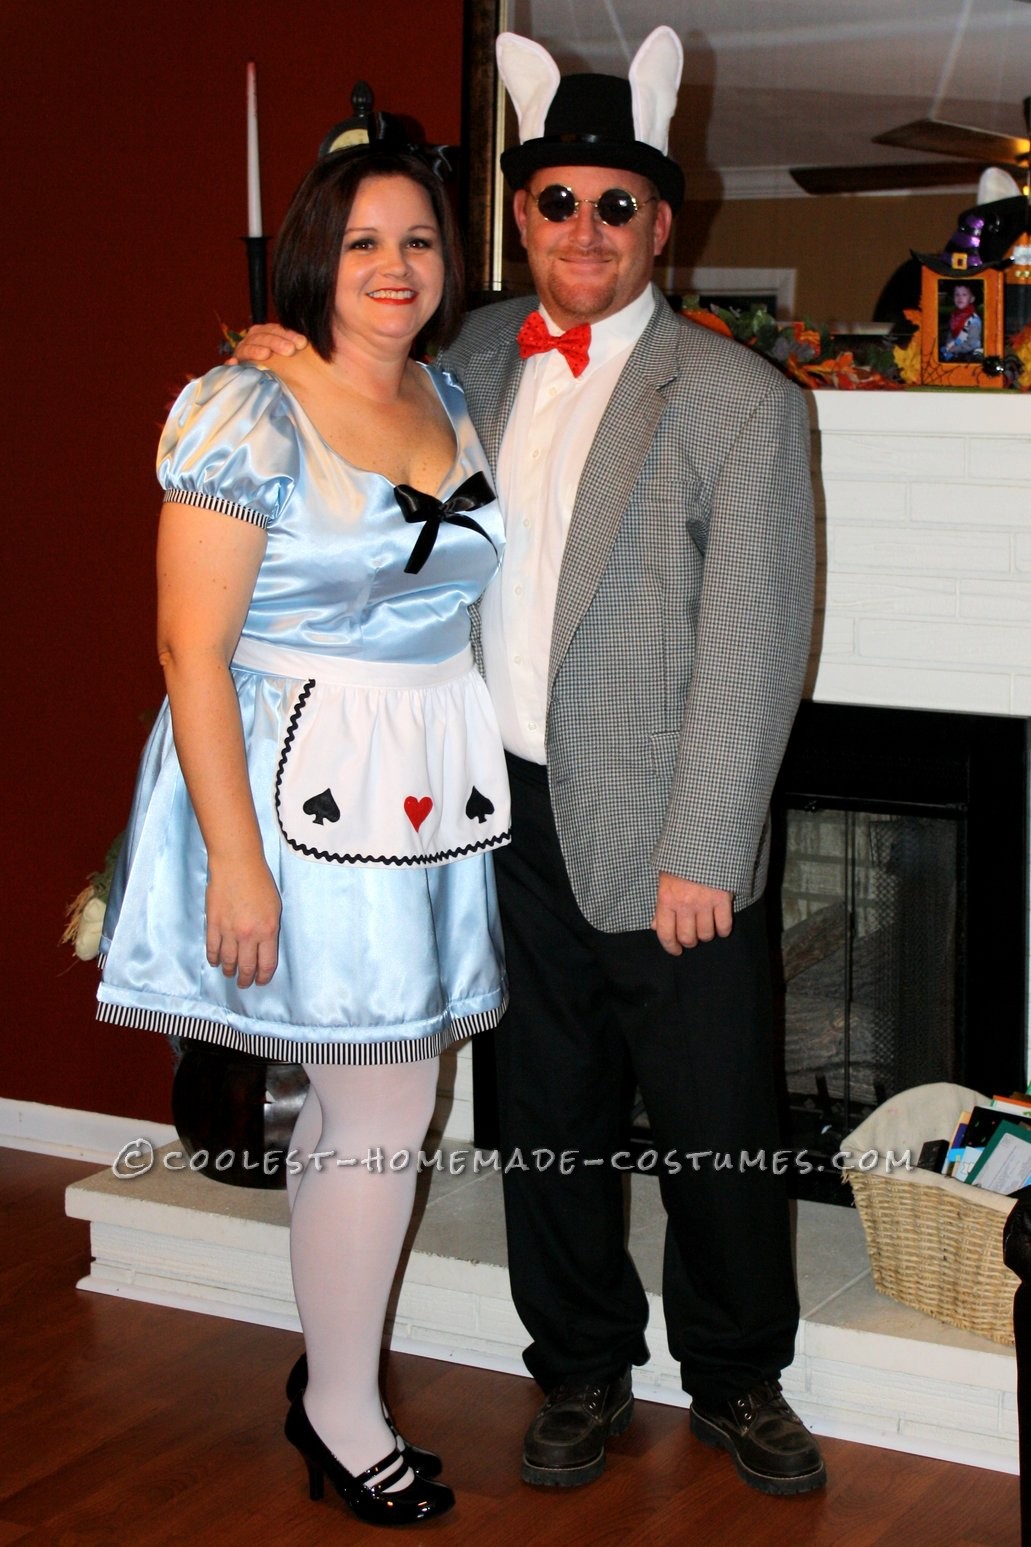 My husband and I decided to go as Alice and The White Rabbit this year. It was a bit of a last minute decision and I put these costumes together in a